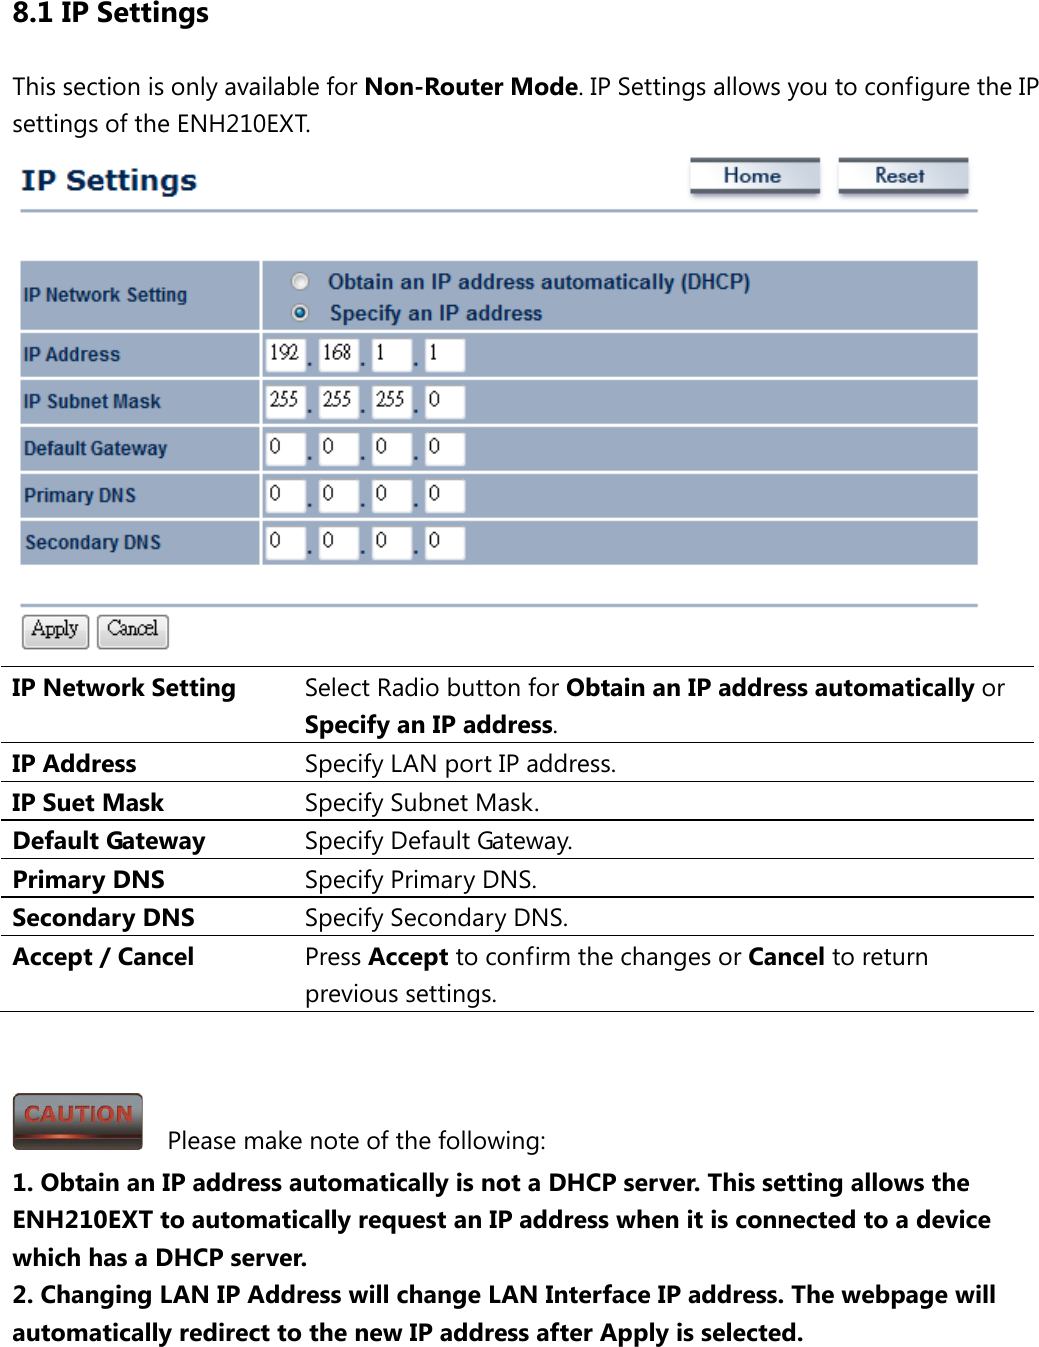 8.1 IP Settings This section is only available for Non-Router Mode. IP Settings allows you to configure the IP settings of the ENH210EXT.    IP Network Setting Select Radio button for Obtain an IP address automatically or Specify an IP address. IP Address Specify LAN port IP address. IP Suet Mask Specify Subnet Mask. Default Gateway Specify Default Gateway. Primary DNS Specify Primary DNS. Secondary DNS Specify Secondary DNS. Accept / Cancel Press Accept to confirm the changes or Cancel to return previous settings.     Please make note of the following: 1. Obtain an IP address automatically is not a DHCP server. This setting allows the ENH210EXT to automatically request an IP address when it is connected to a device which has a DHCP server. 2. Changing LAN IP Address will change LAN Interface IP address. The webpage will automatically redirect to the new IP address after Apply is selected. 